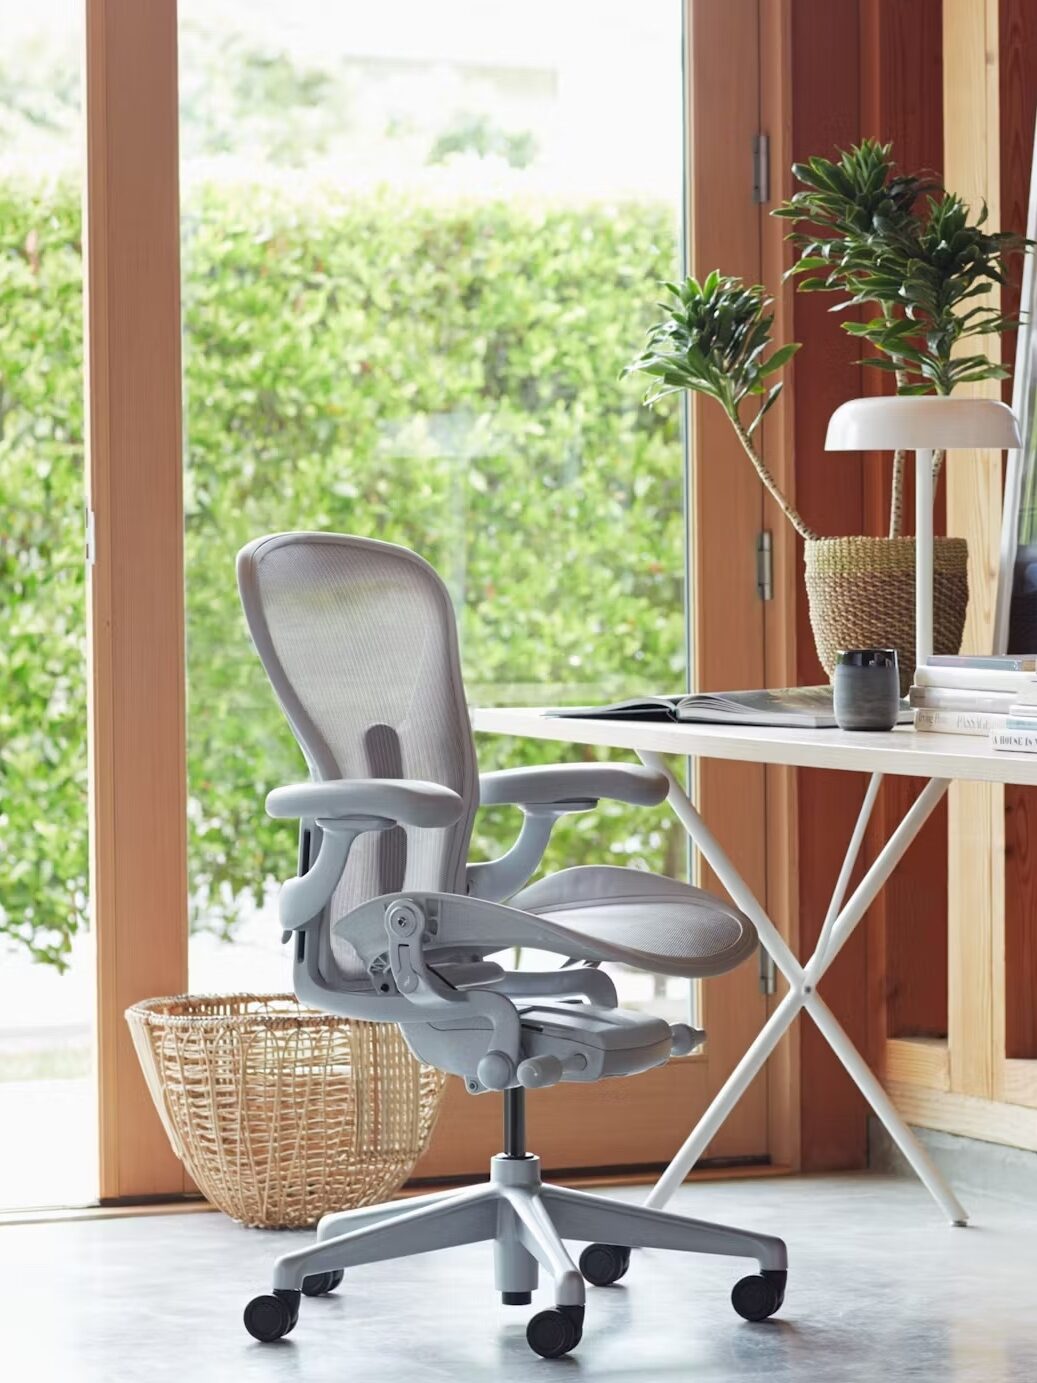 An ergonomic office chair next to a simple desk with a laptop, books, a potted plant, and a wicker basket, positioned by large windows and a view of greenery.